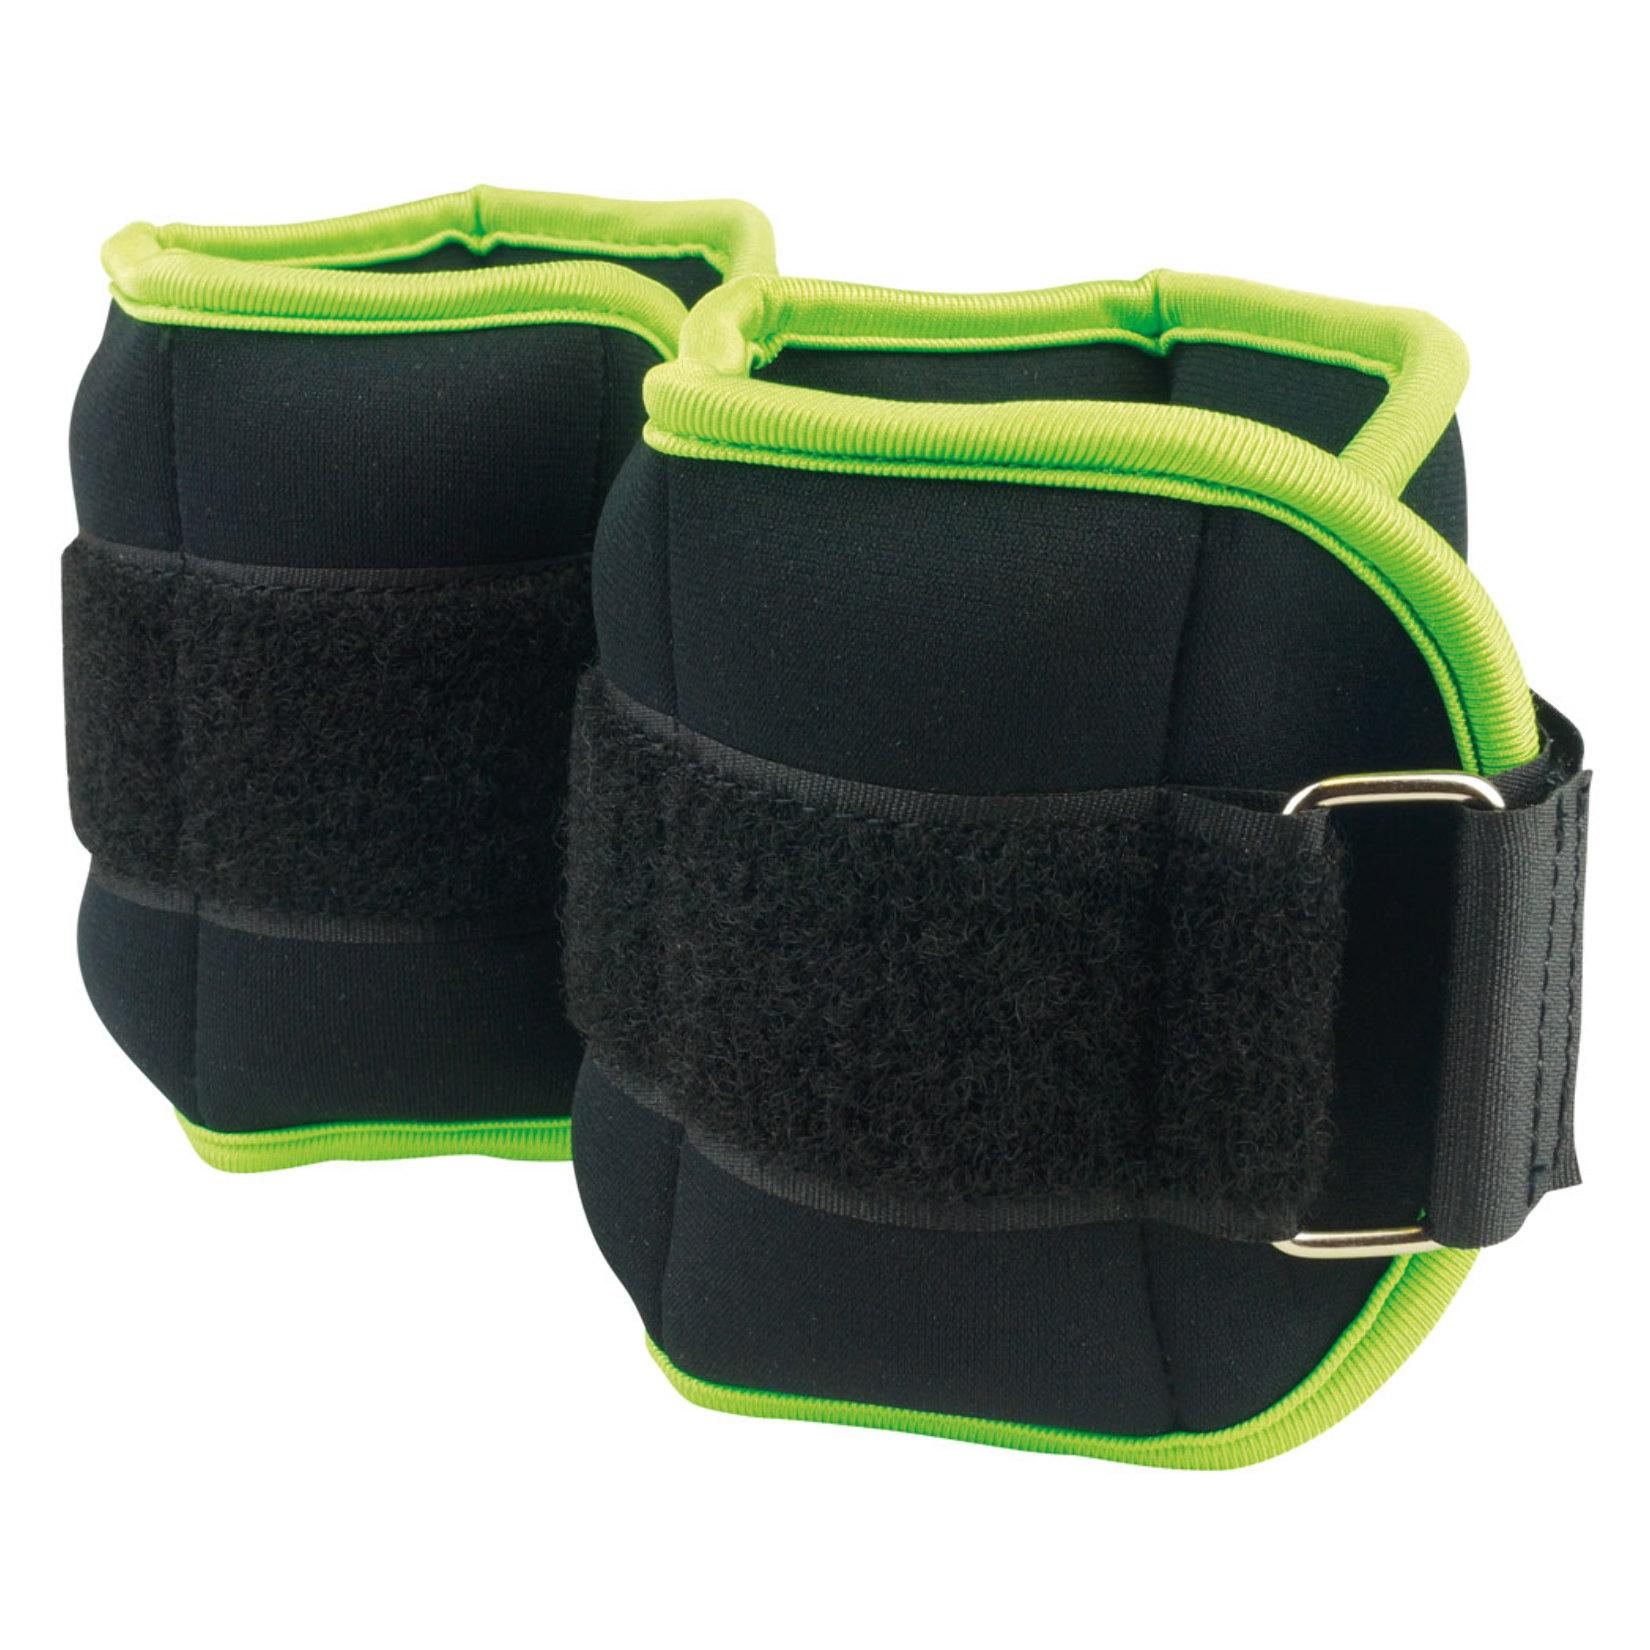 Urban-Fitness Fitness Ankle/Wrist Weights